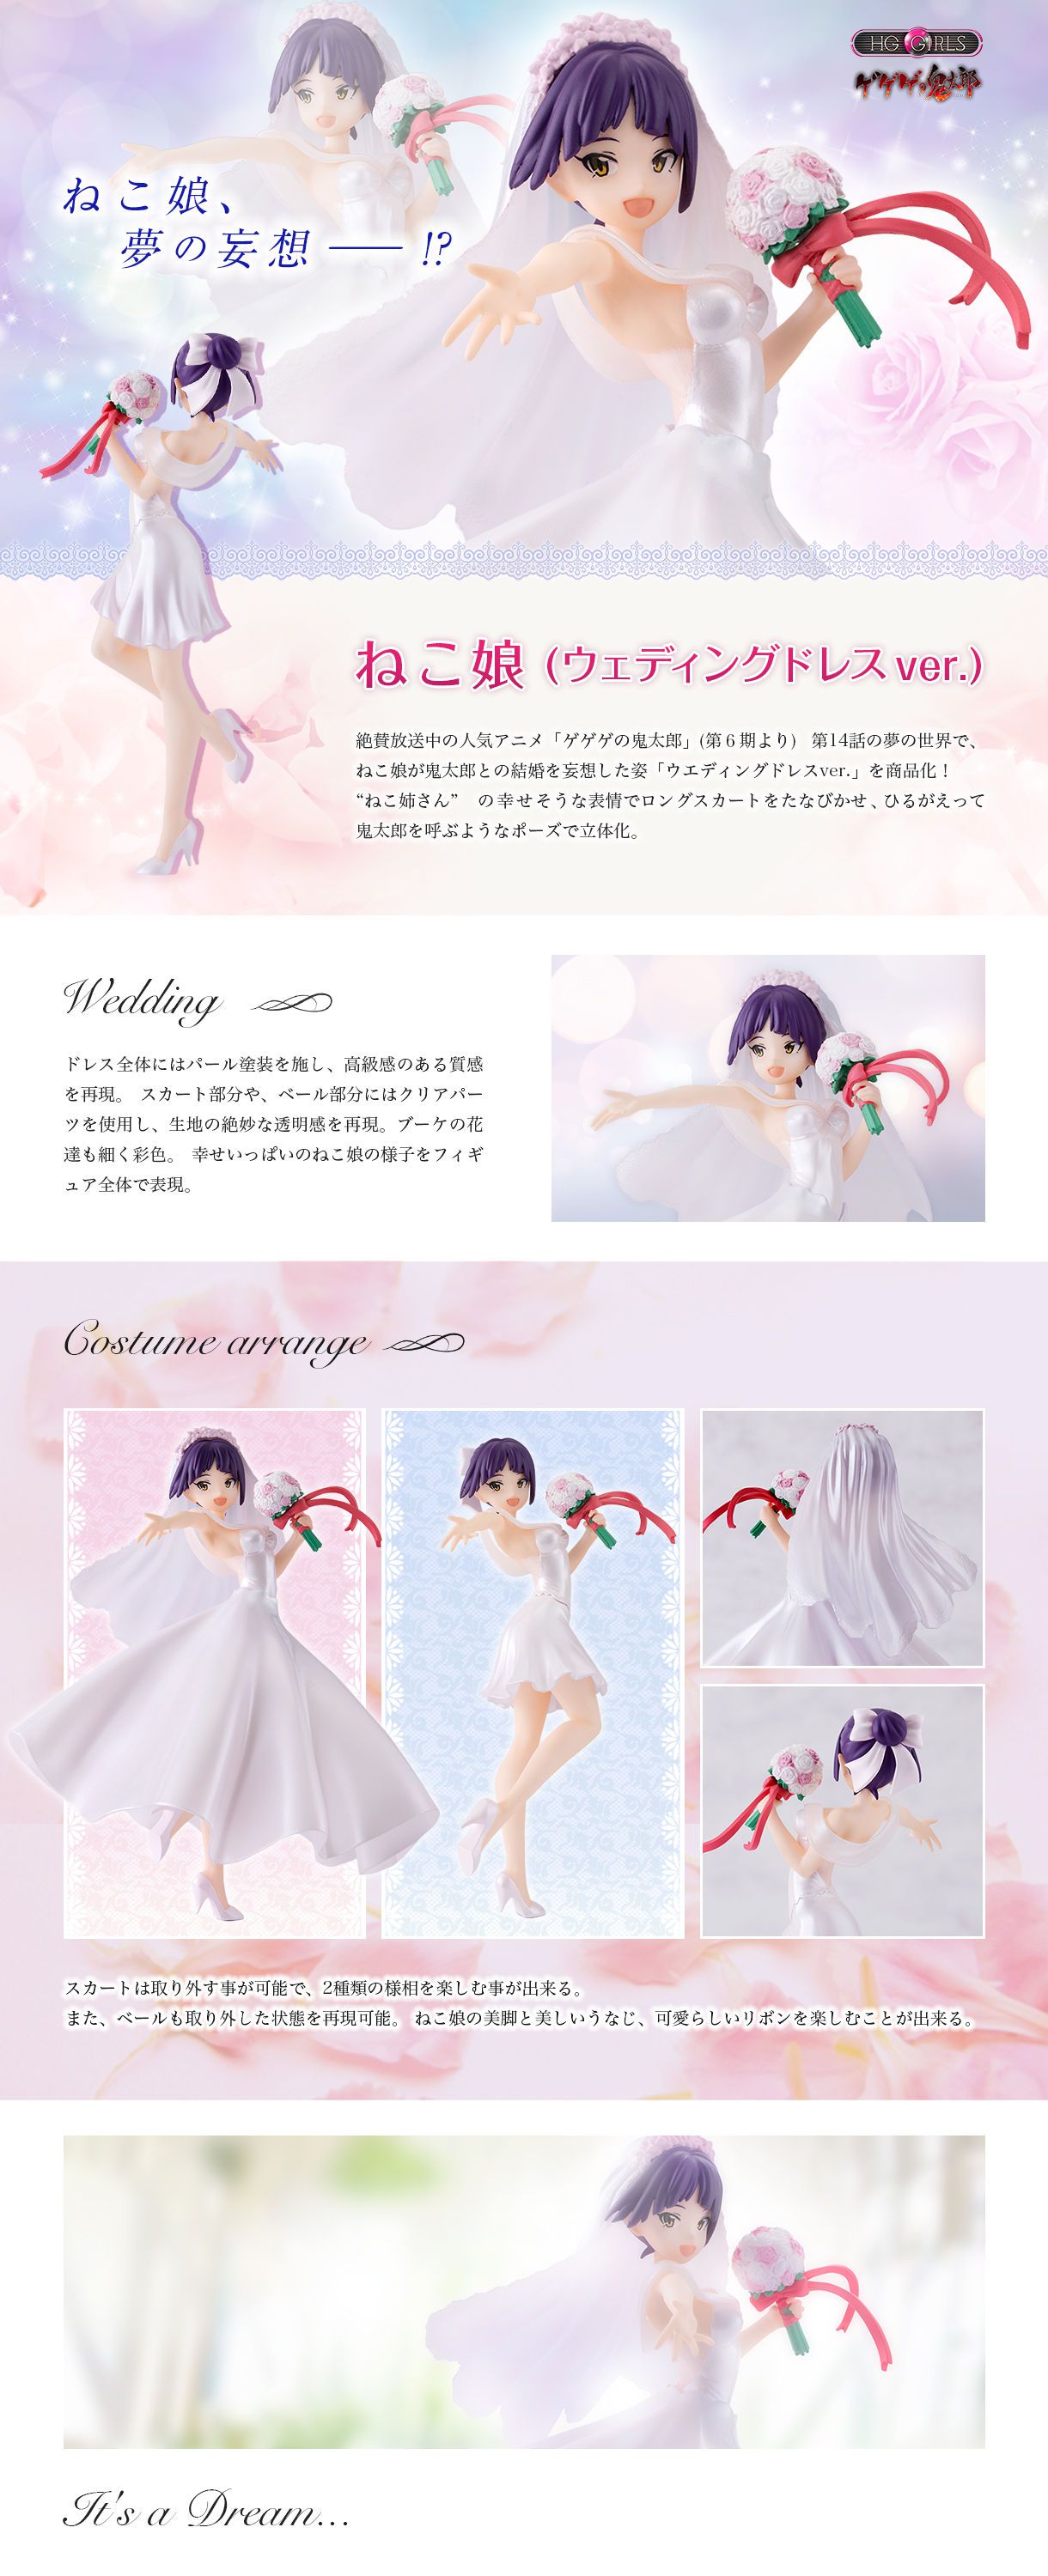 New [GeGeGe no Kitaro] erotic figure to undress even clothes in the erotic wedding dress of the cat daughter! 2